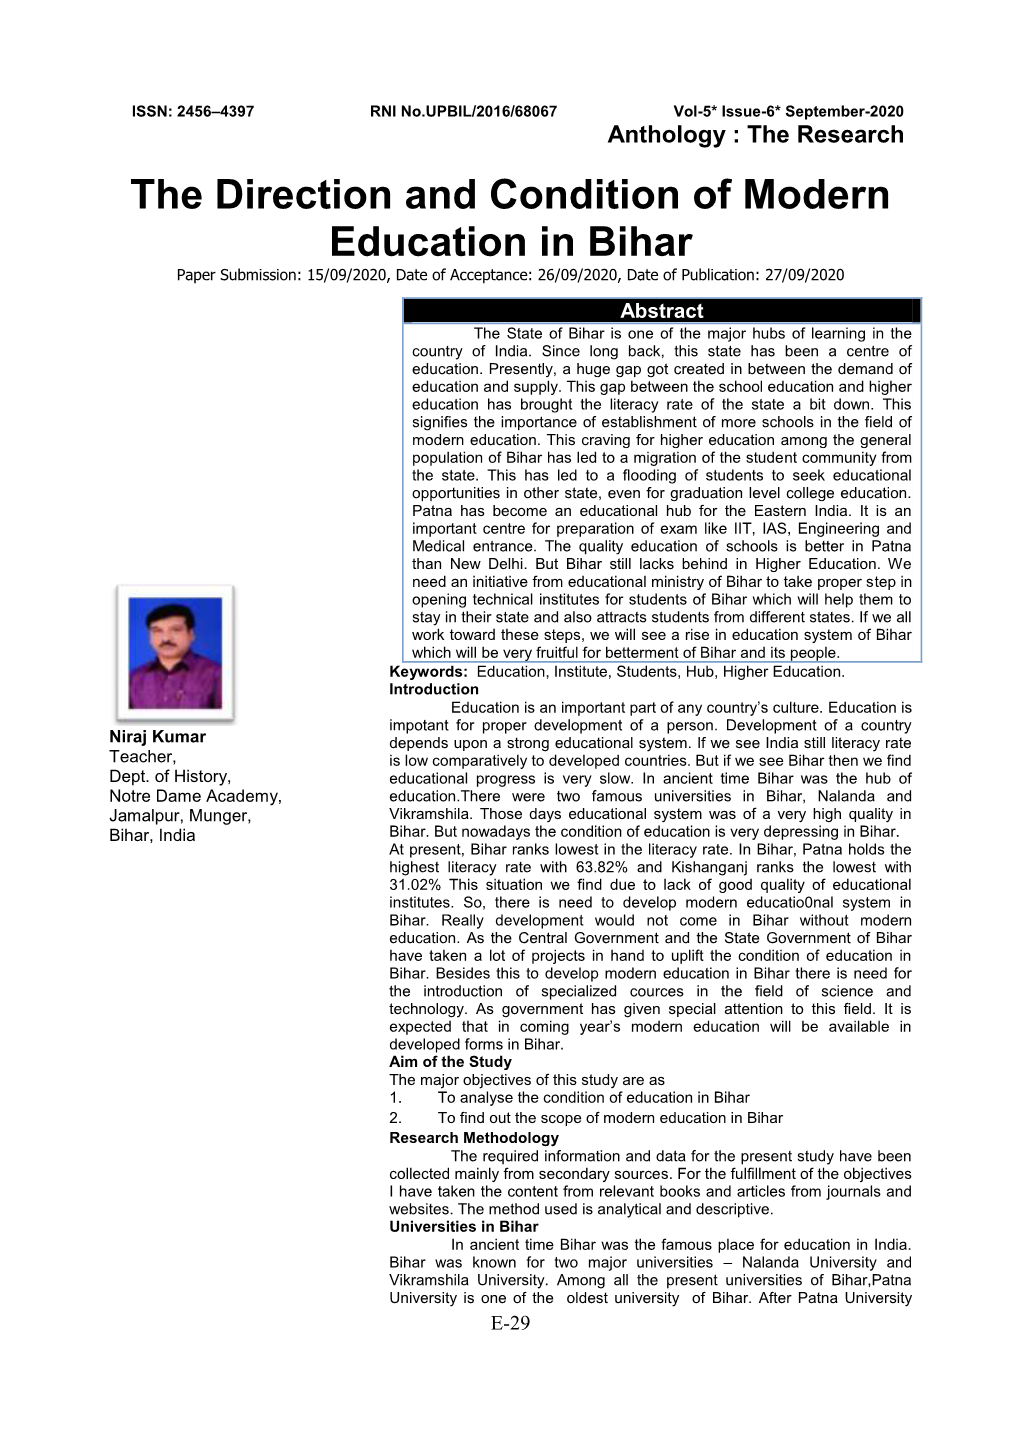 The Direction and Condition of Modern Education in Bihar Niraj